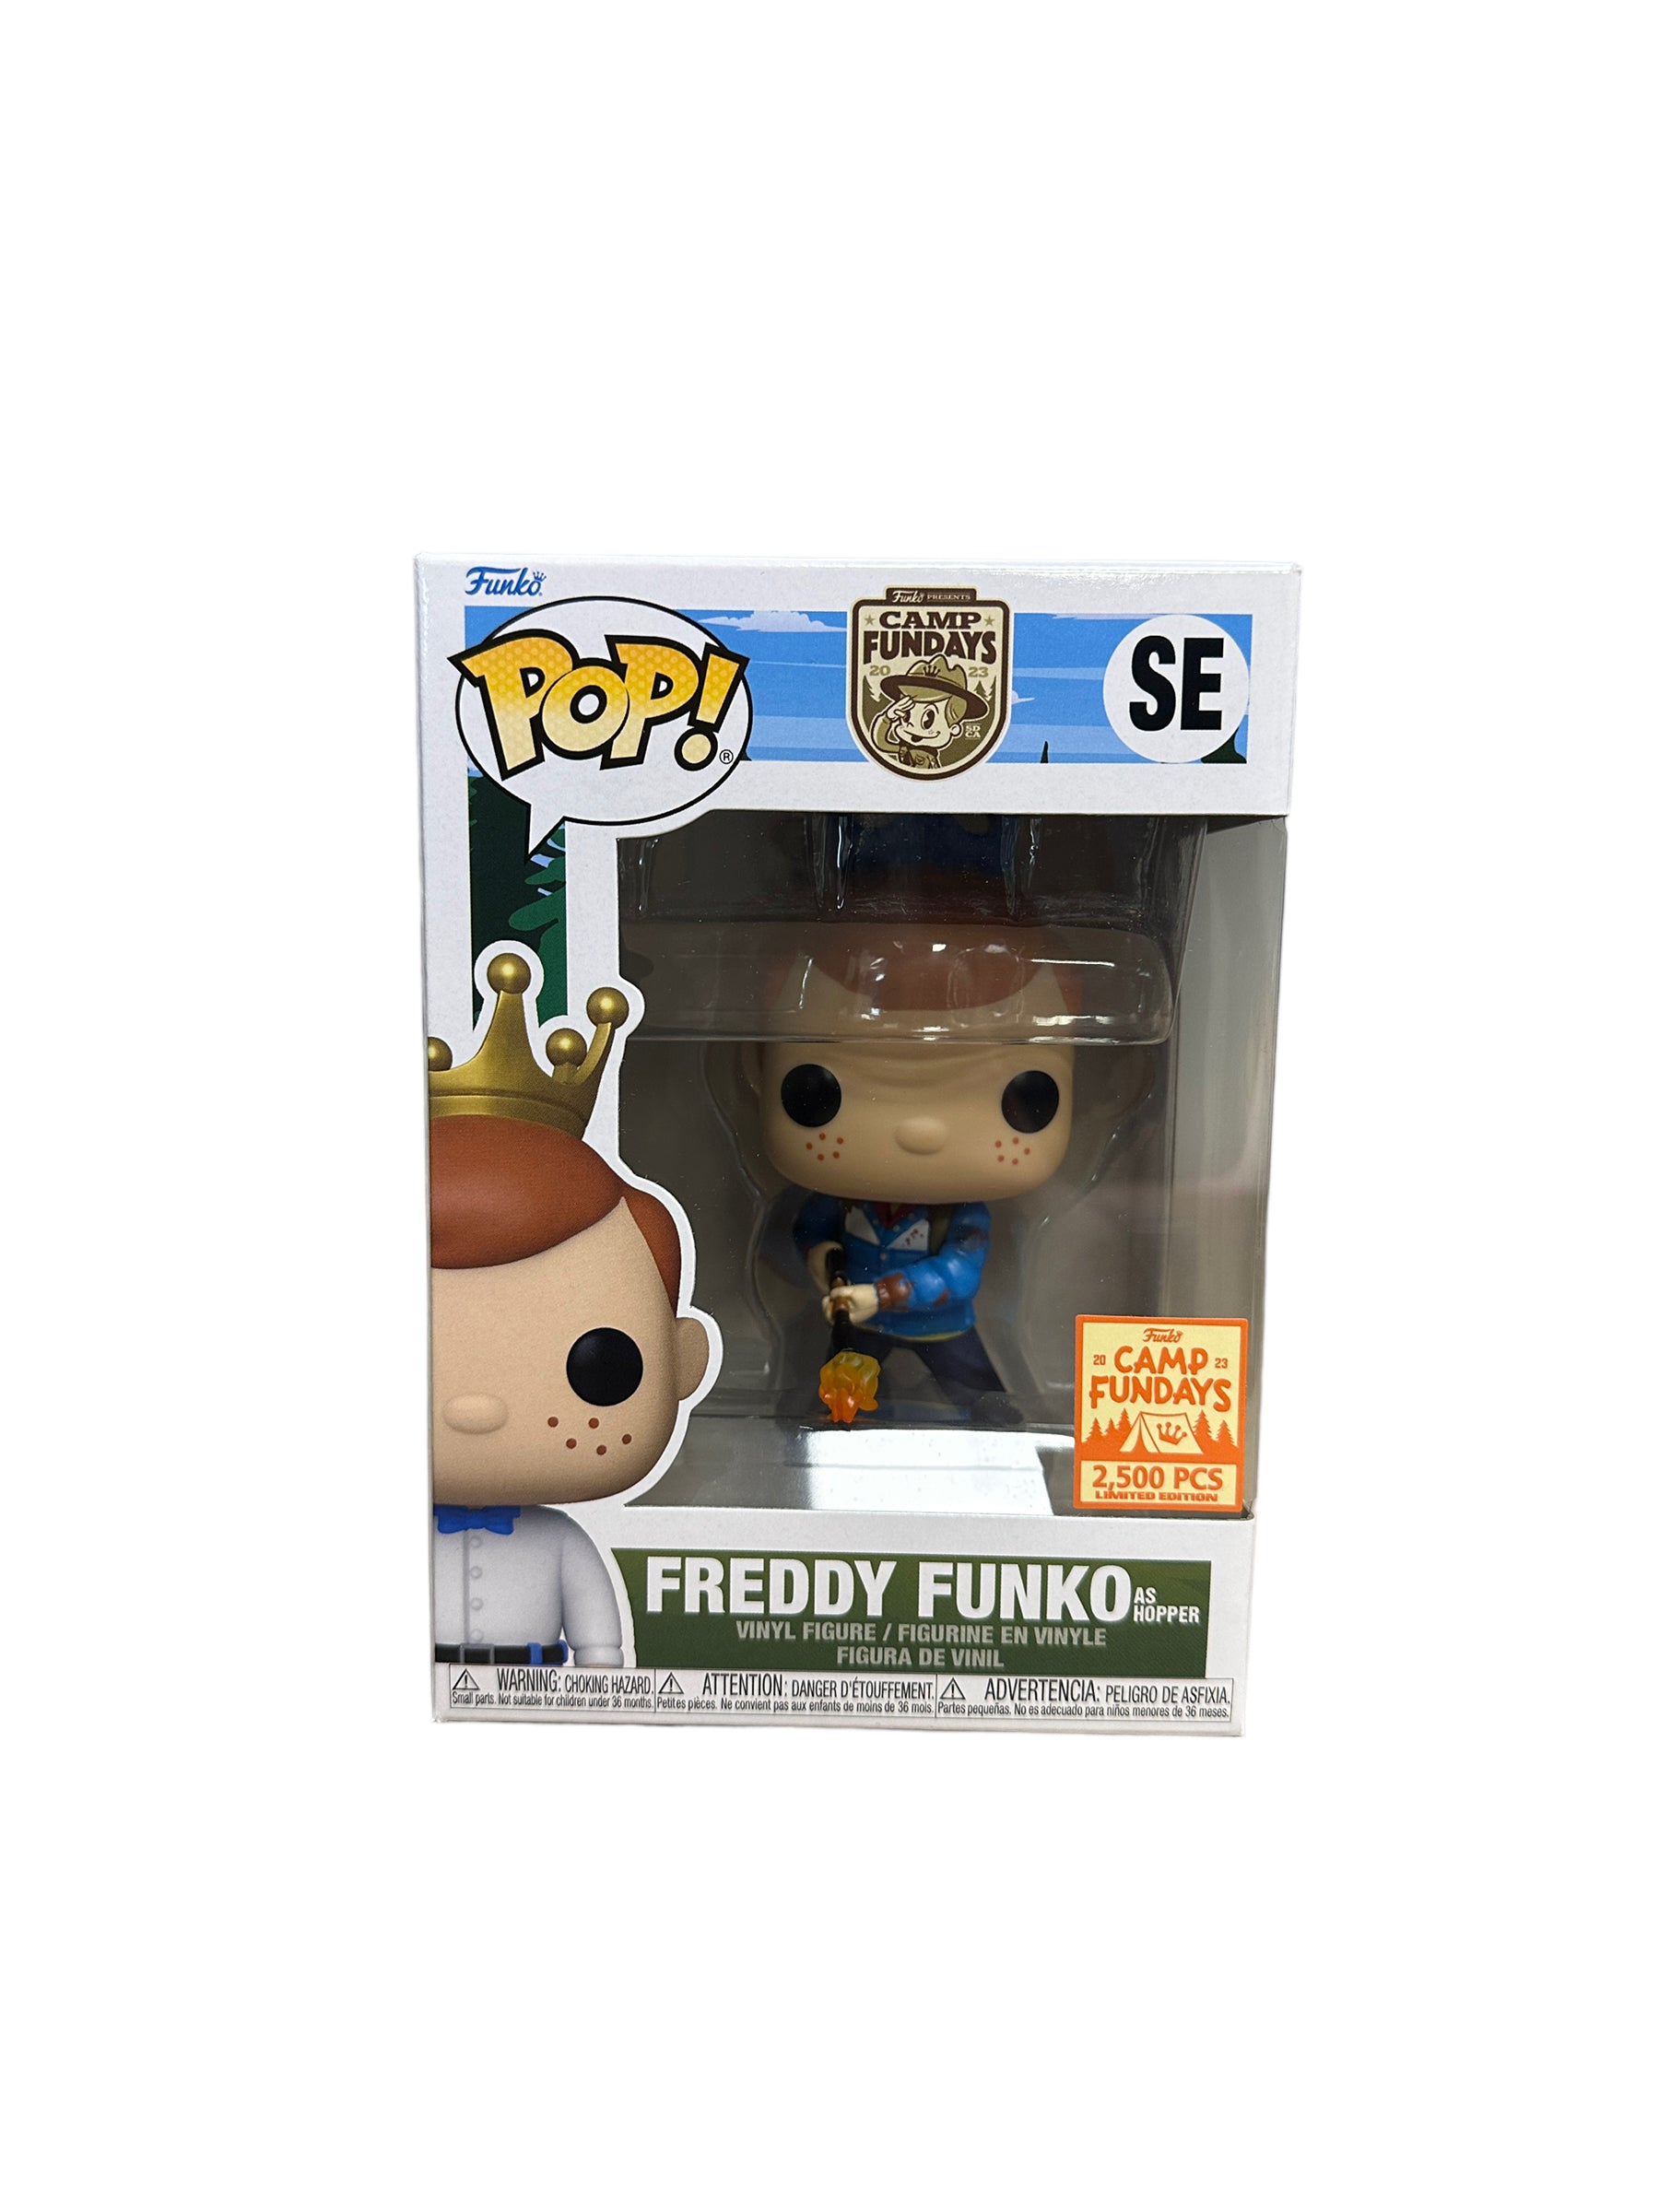 Freddy Funko as Hopper Funko Pop! - Stranger Things - Camp Fundays 2023 Exclusive LE2500 Pcs - Condition 8.75/10